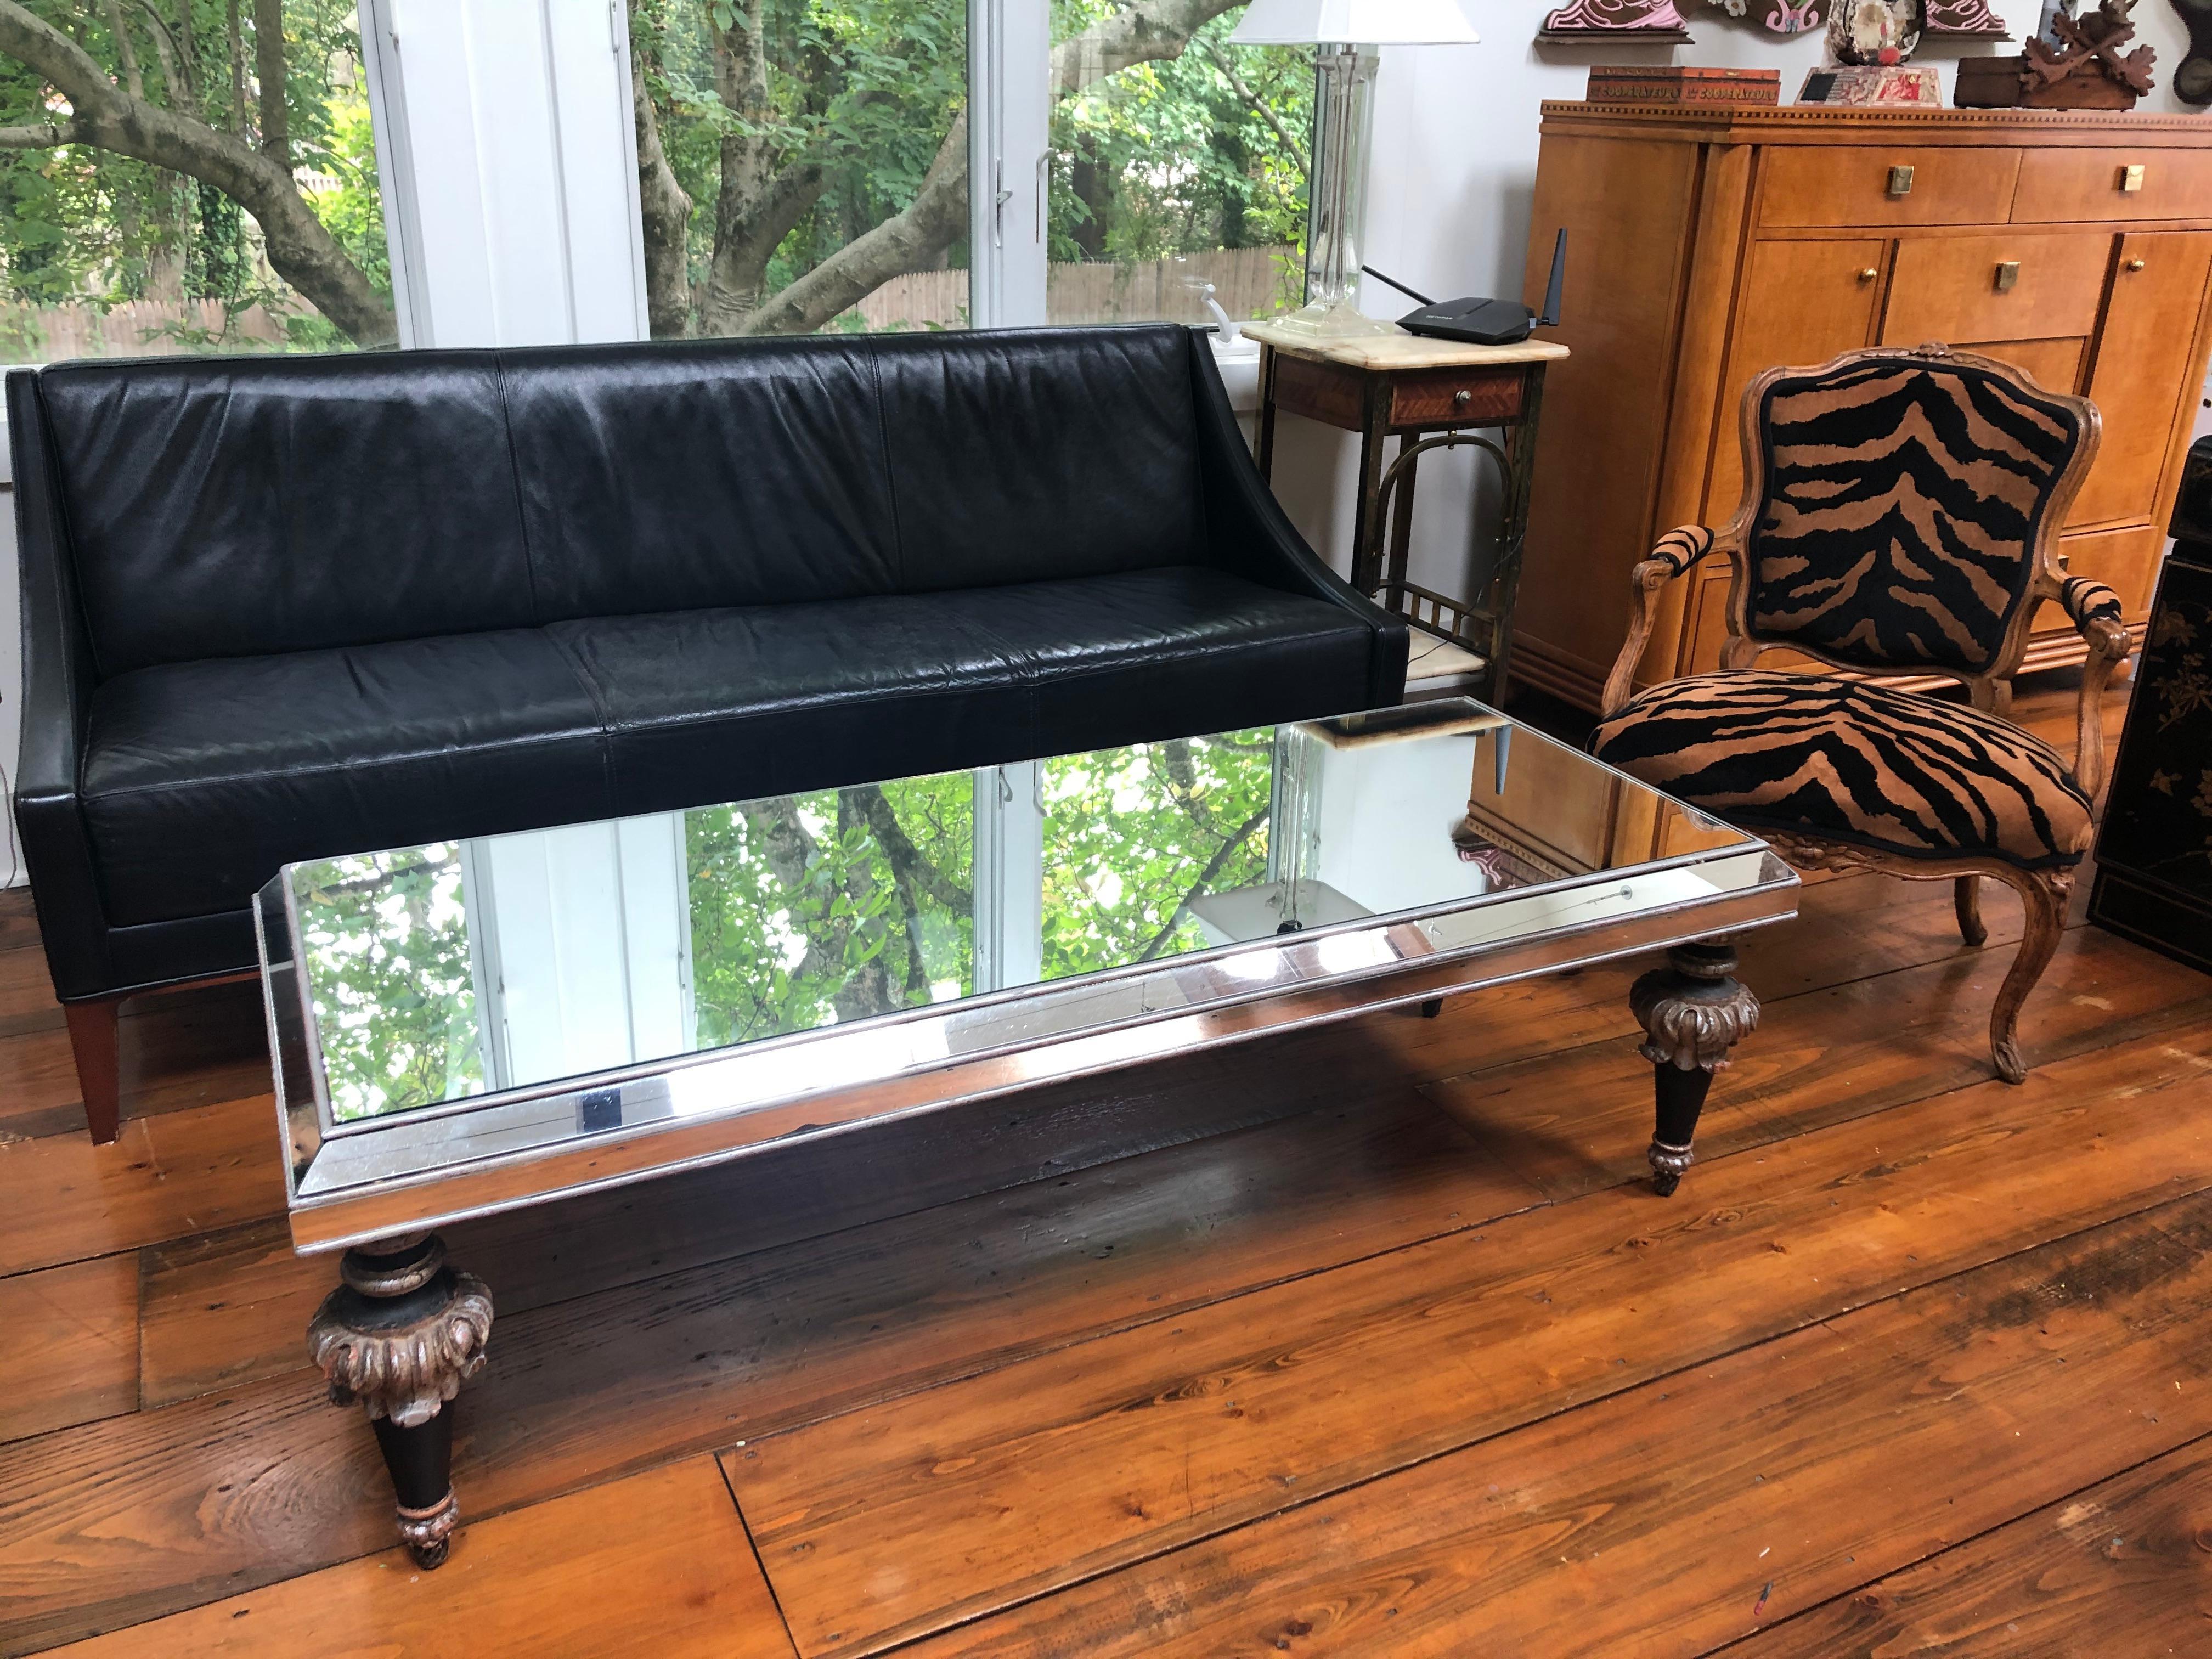 A sleek long and glamorous coffeetable having elaborately carved decorative legs painted black and silver with some of the original reddish underpaint showing through in places. The reflective mirrored top and sides were added later.